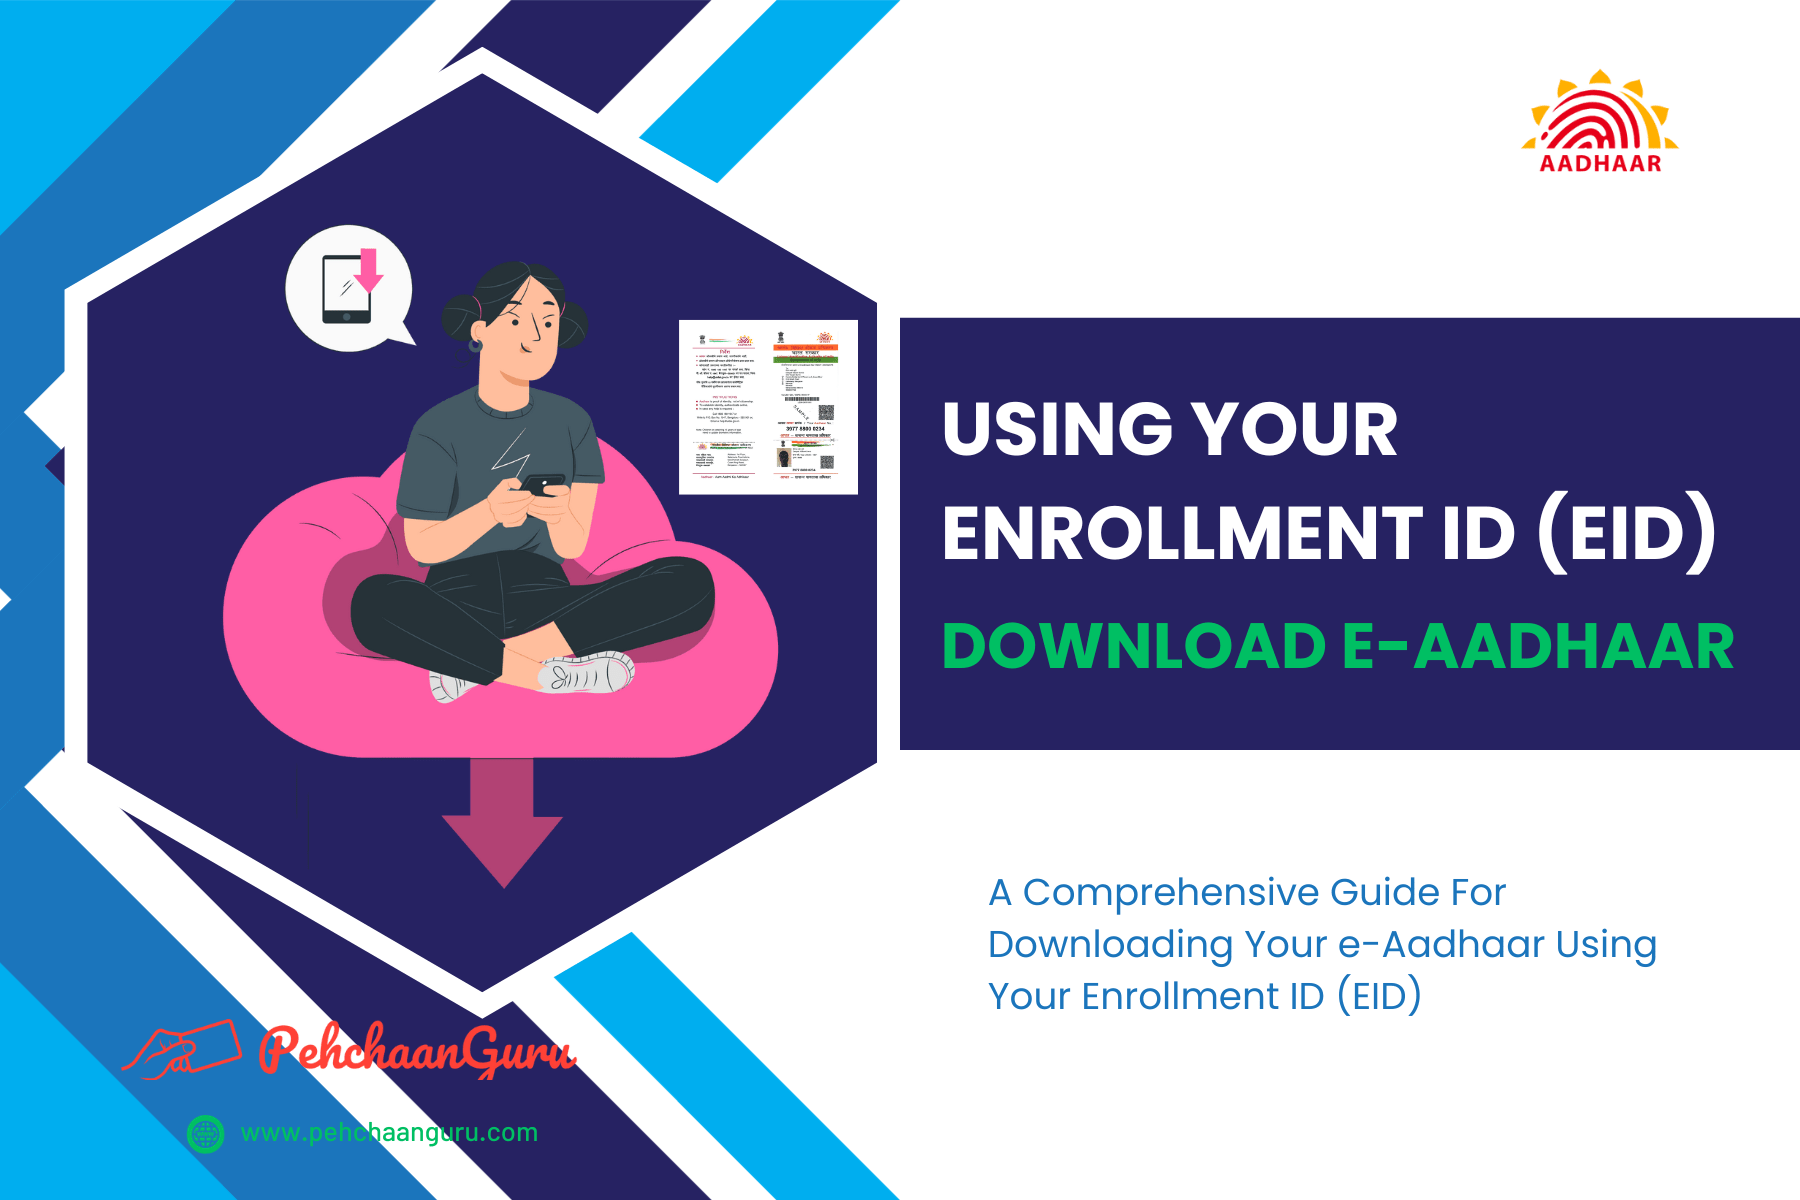 Celebrating Simplicity: A Guide to Downloading Your e-Aadhaar With Enrollment ID (EID)